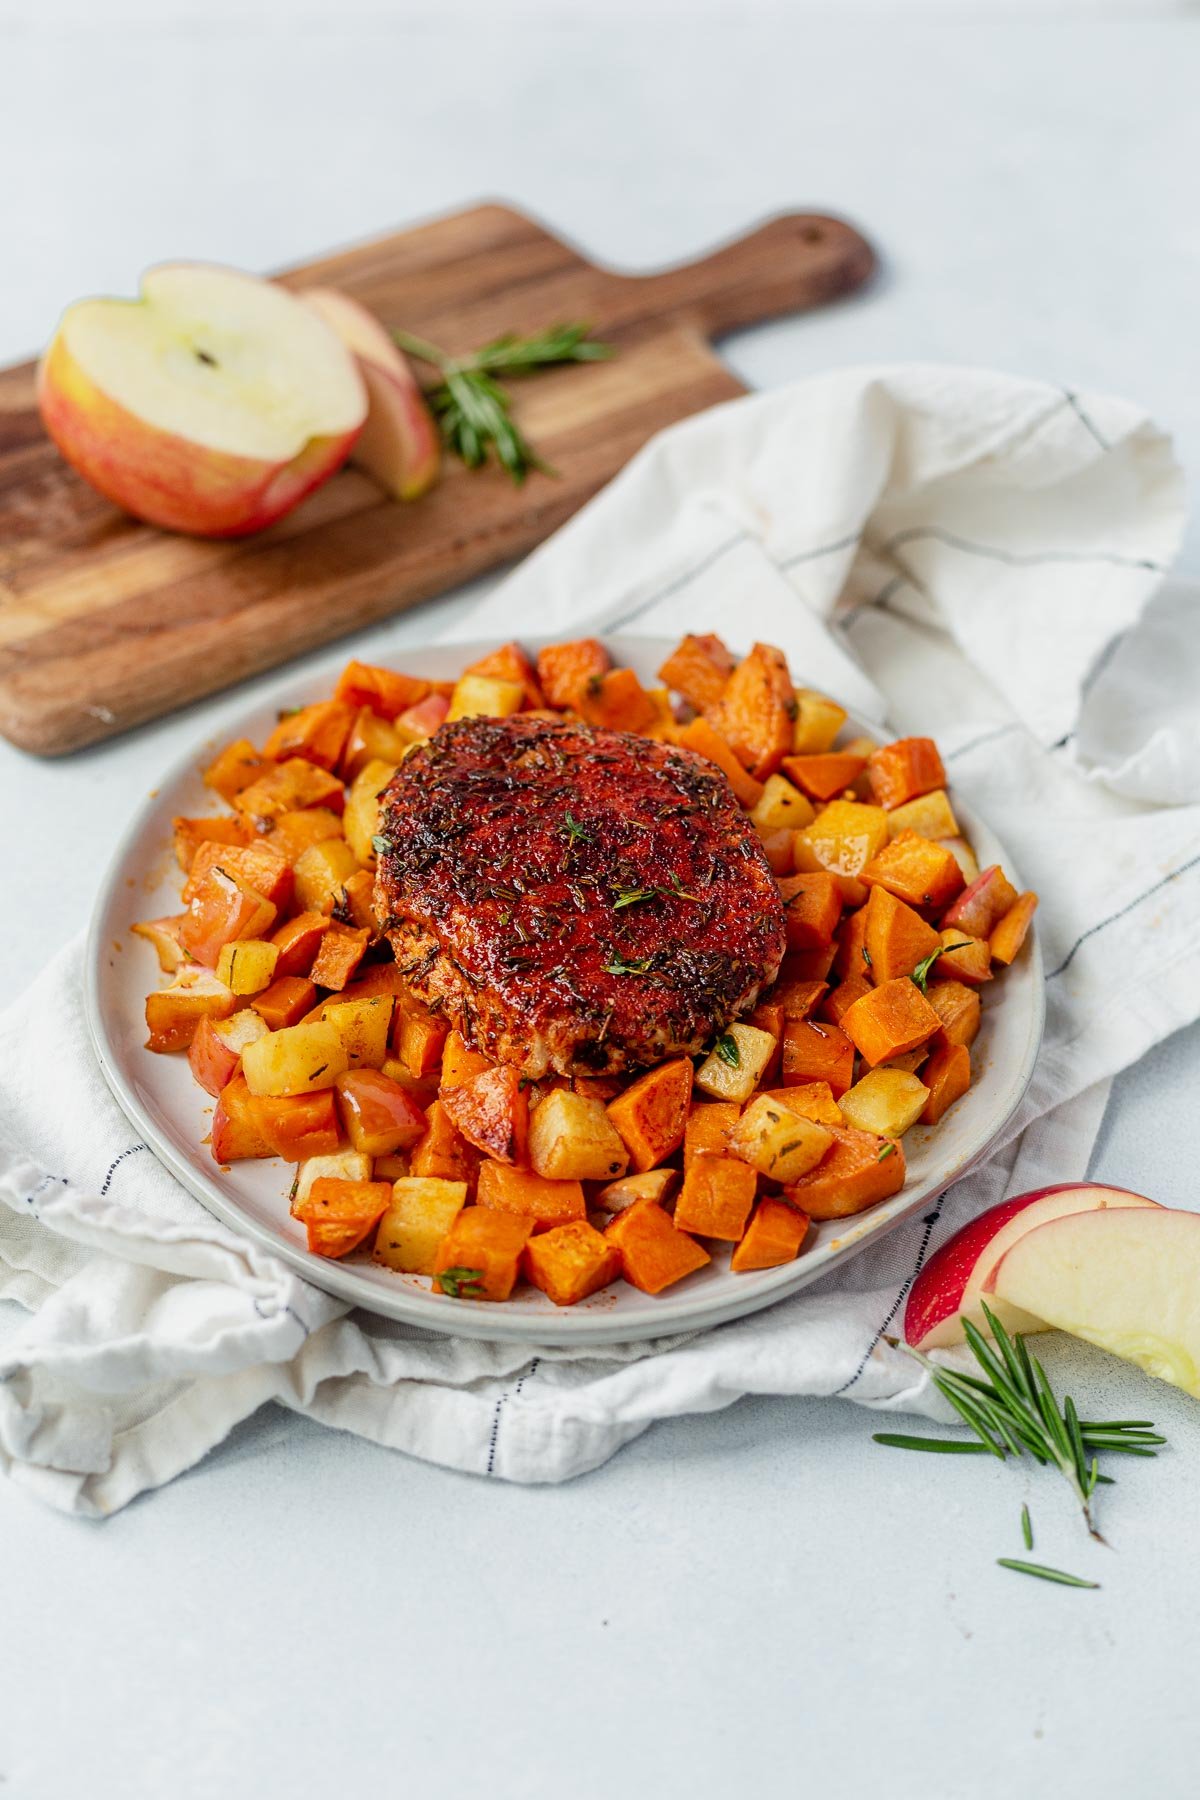 spice rubbed pork chops on a bed of sweet potatoes and apples 